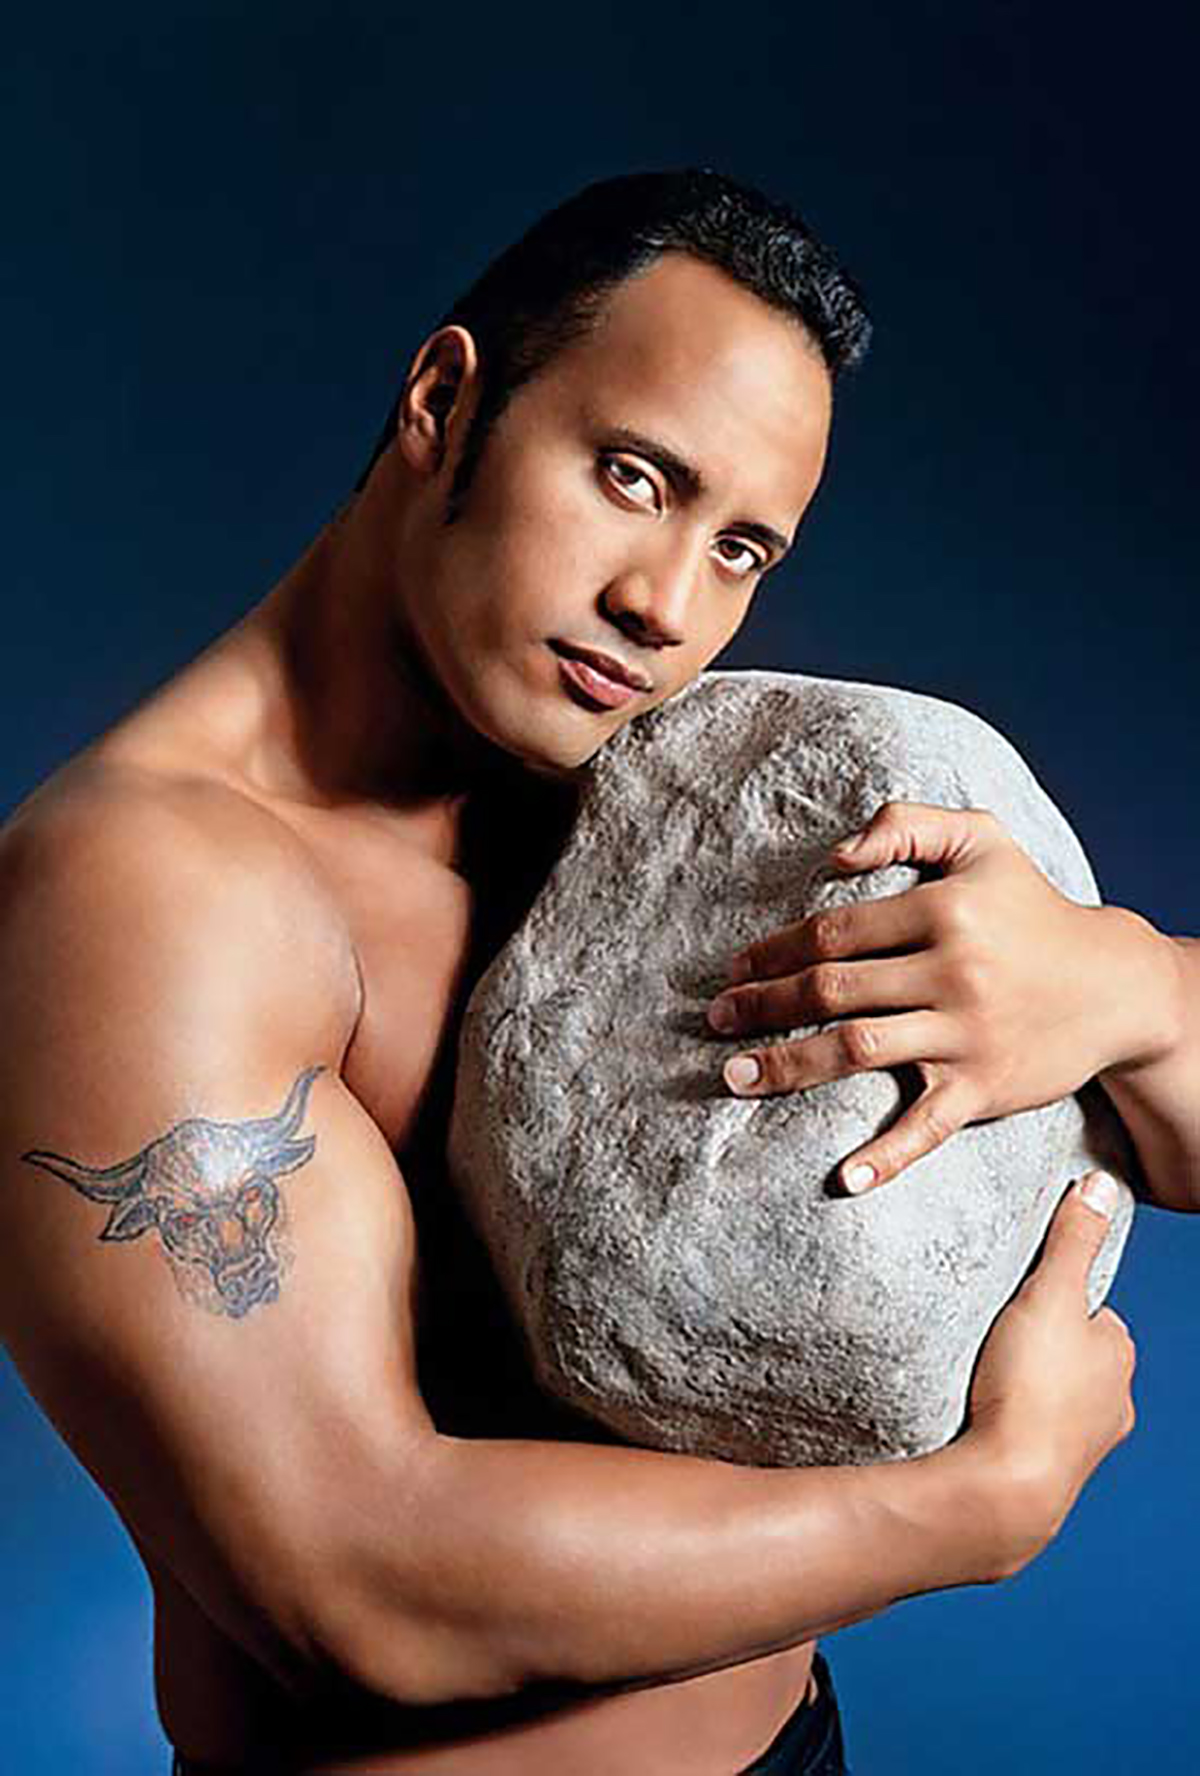 The Rock holding a rock in the late 1990s.